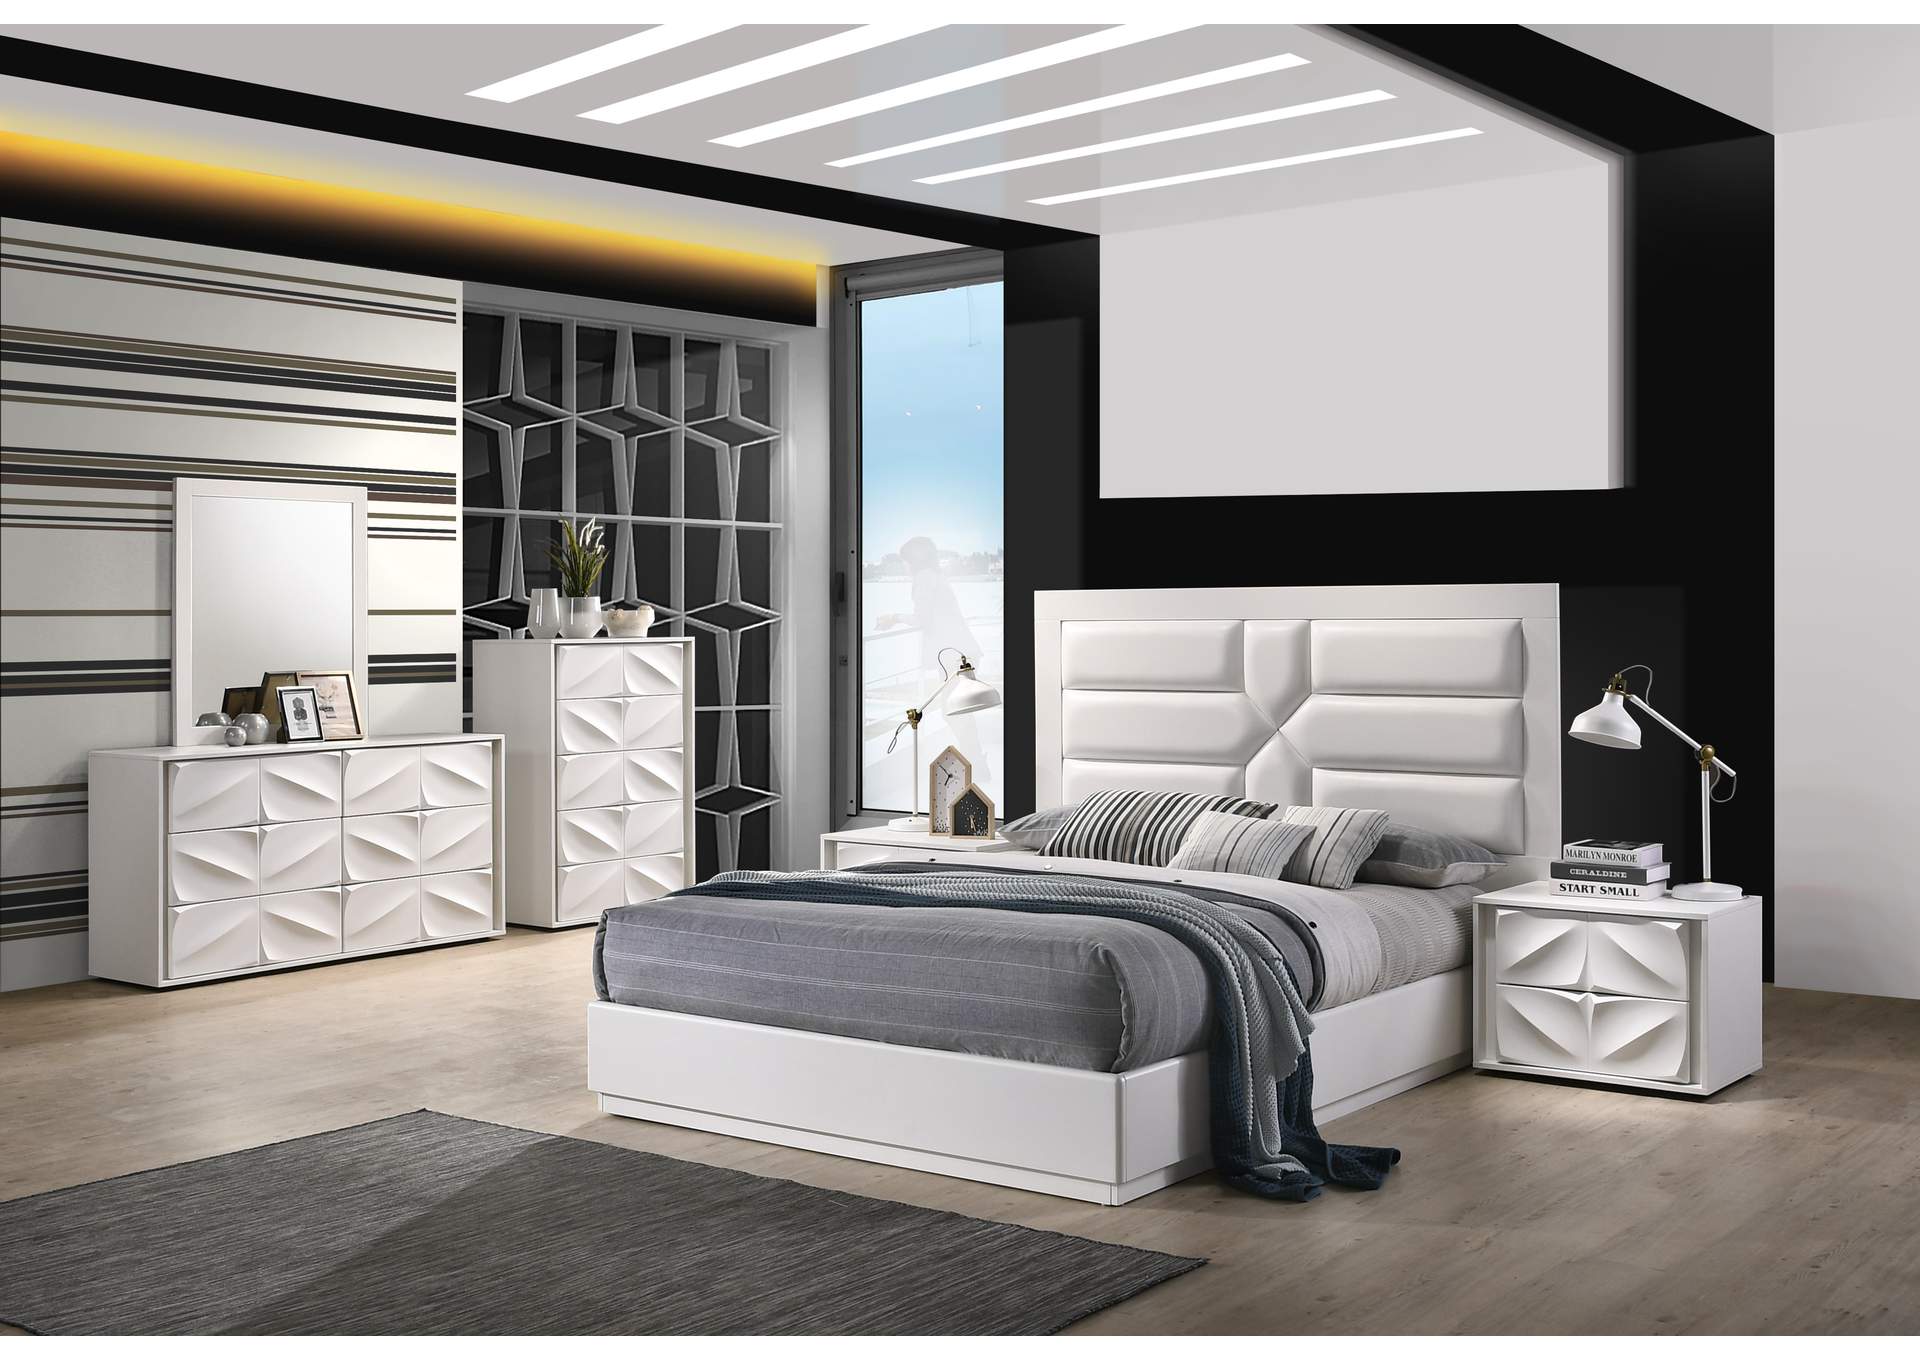 Contemporary King Size Bed,Chintaly Imports